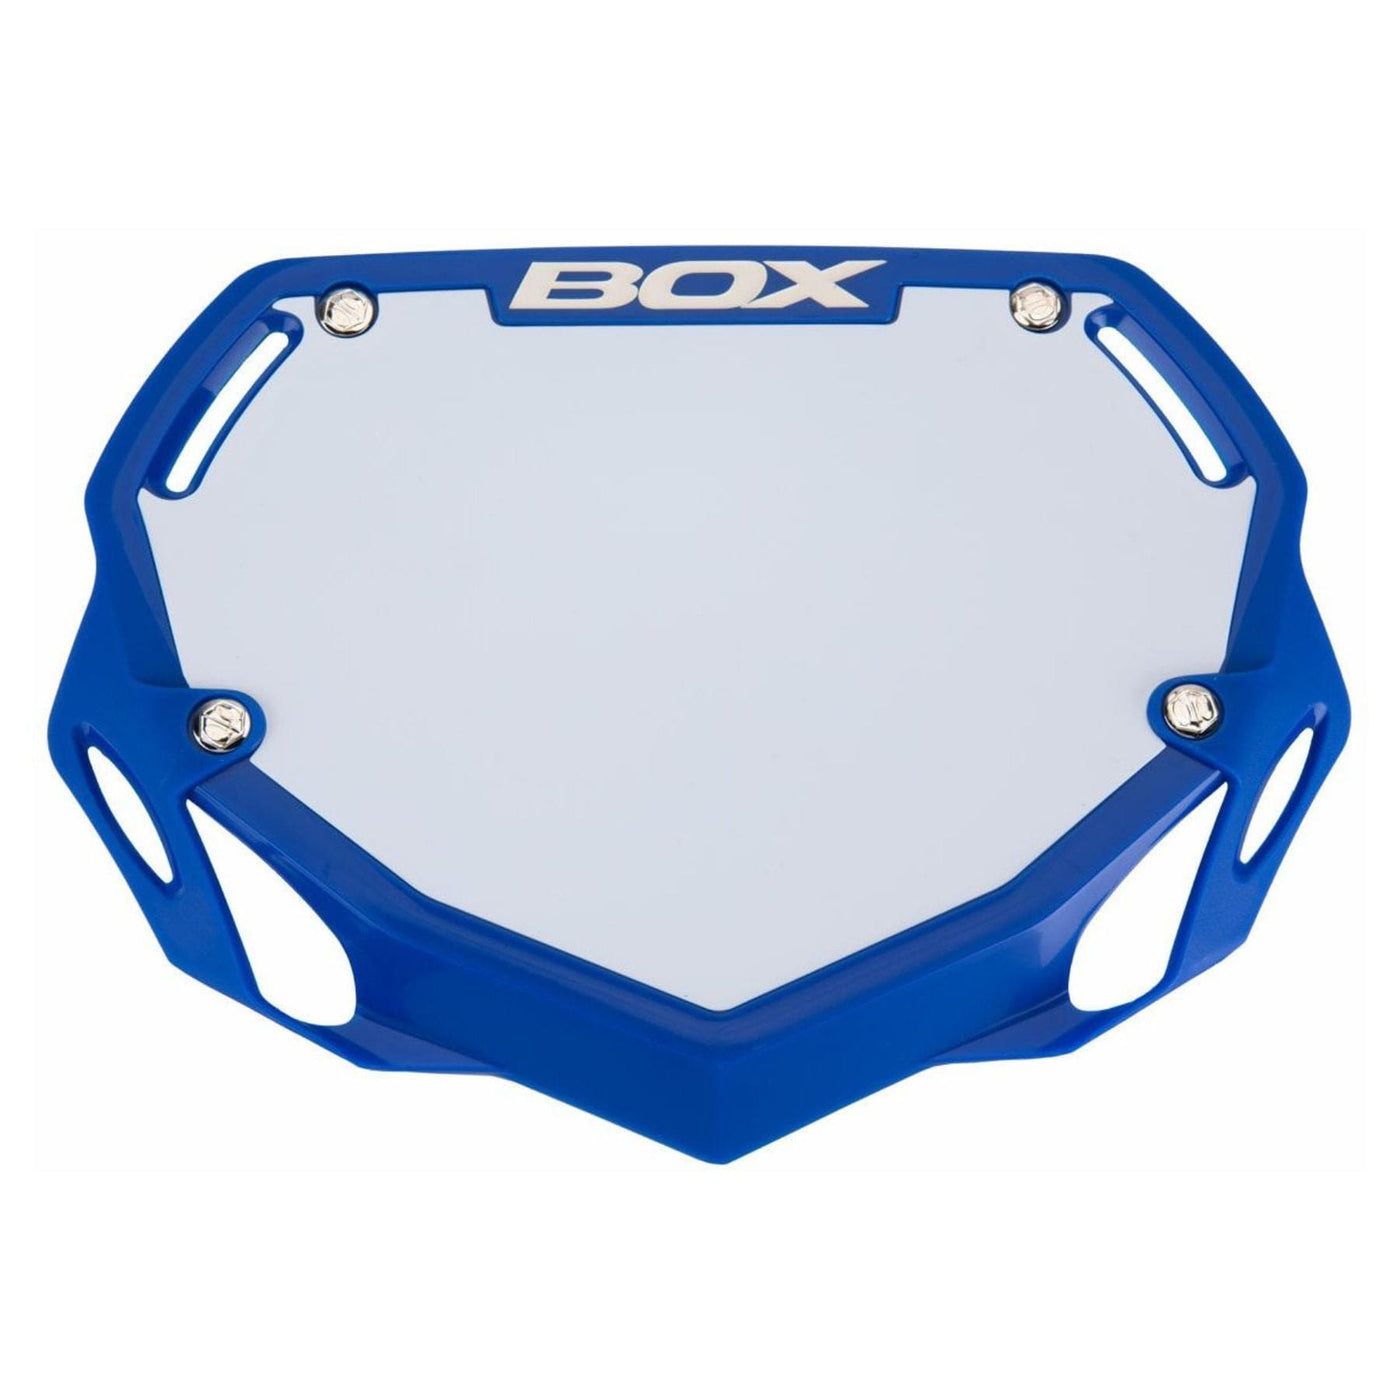 Box One BMX Racing Number Plate - Blue - Small